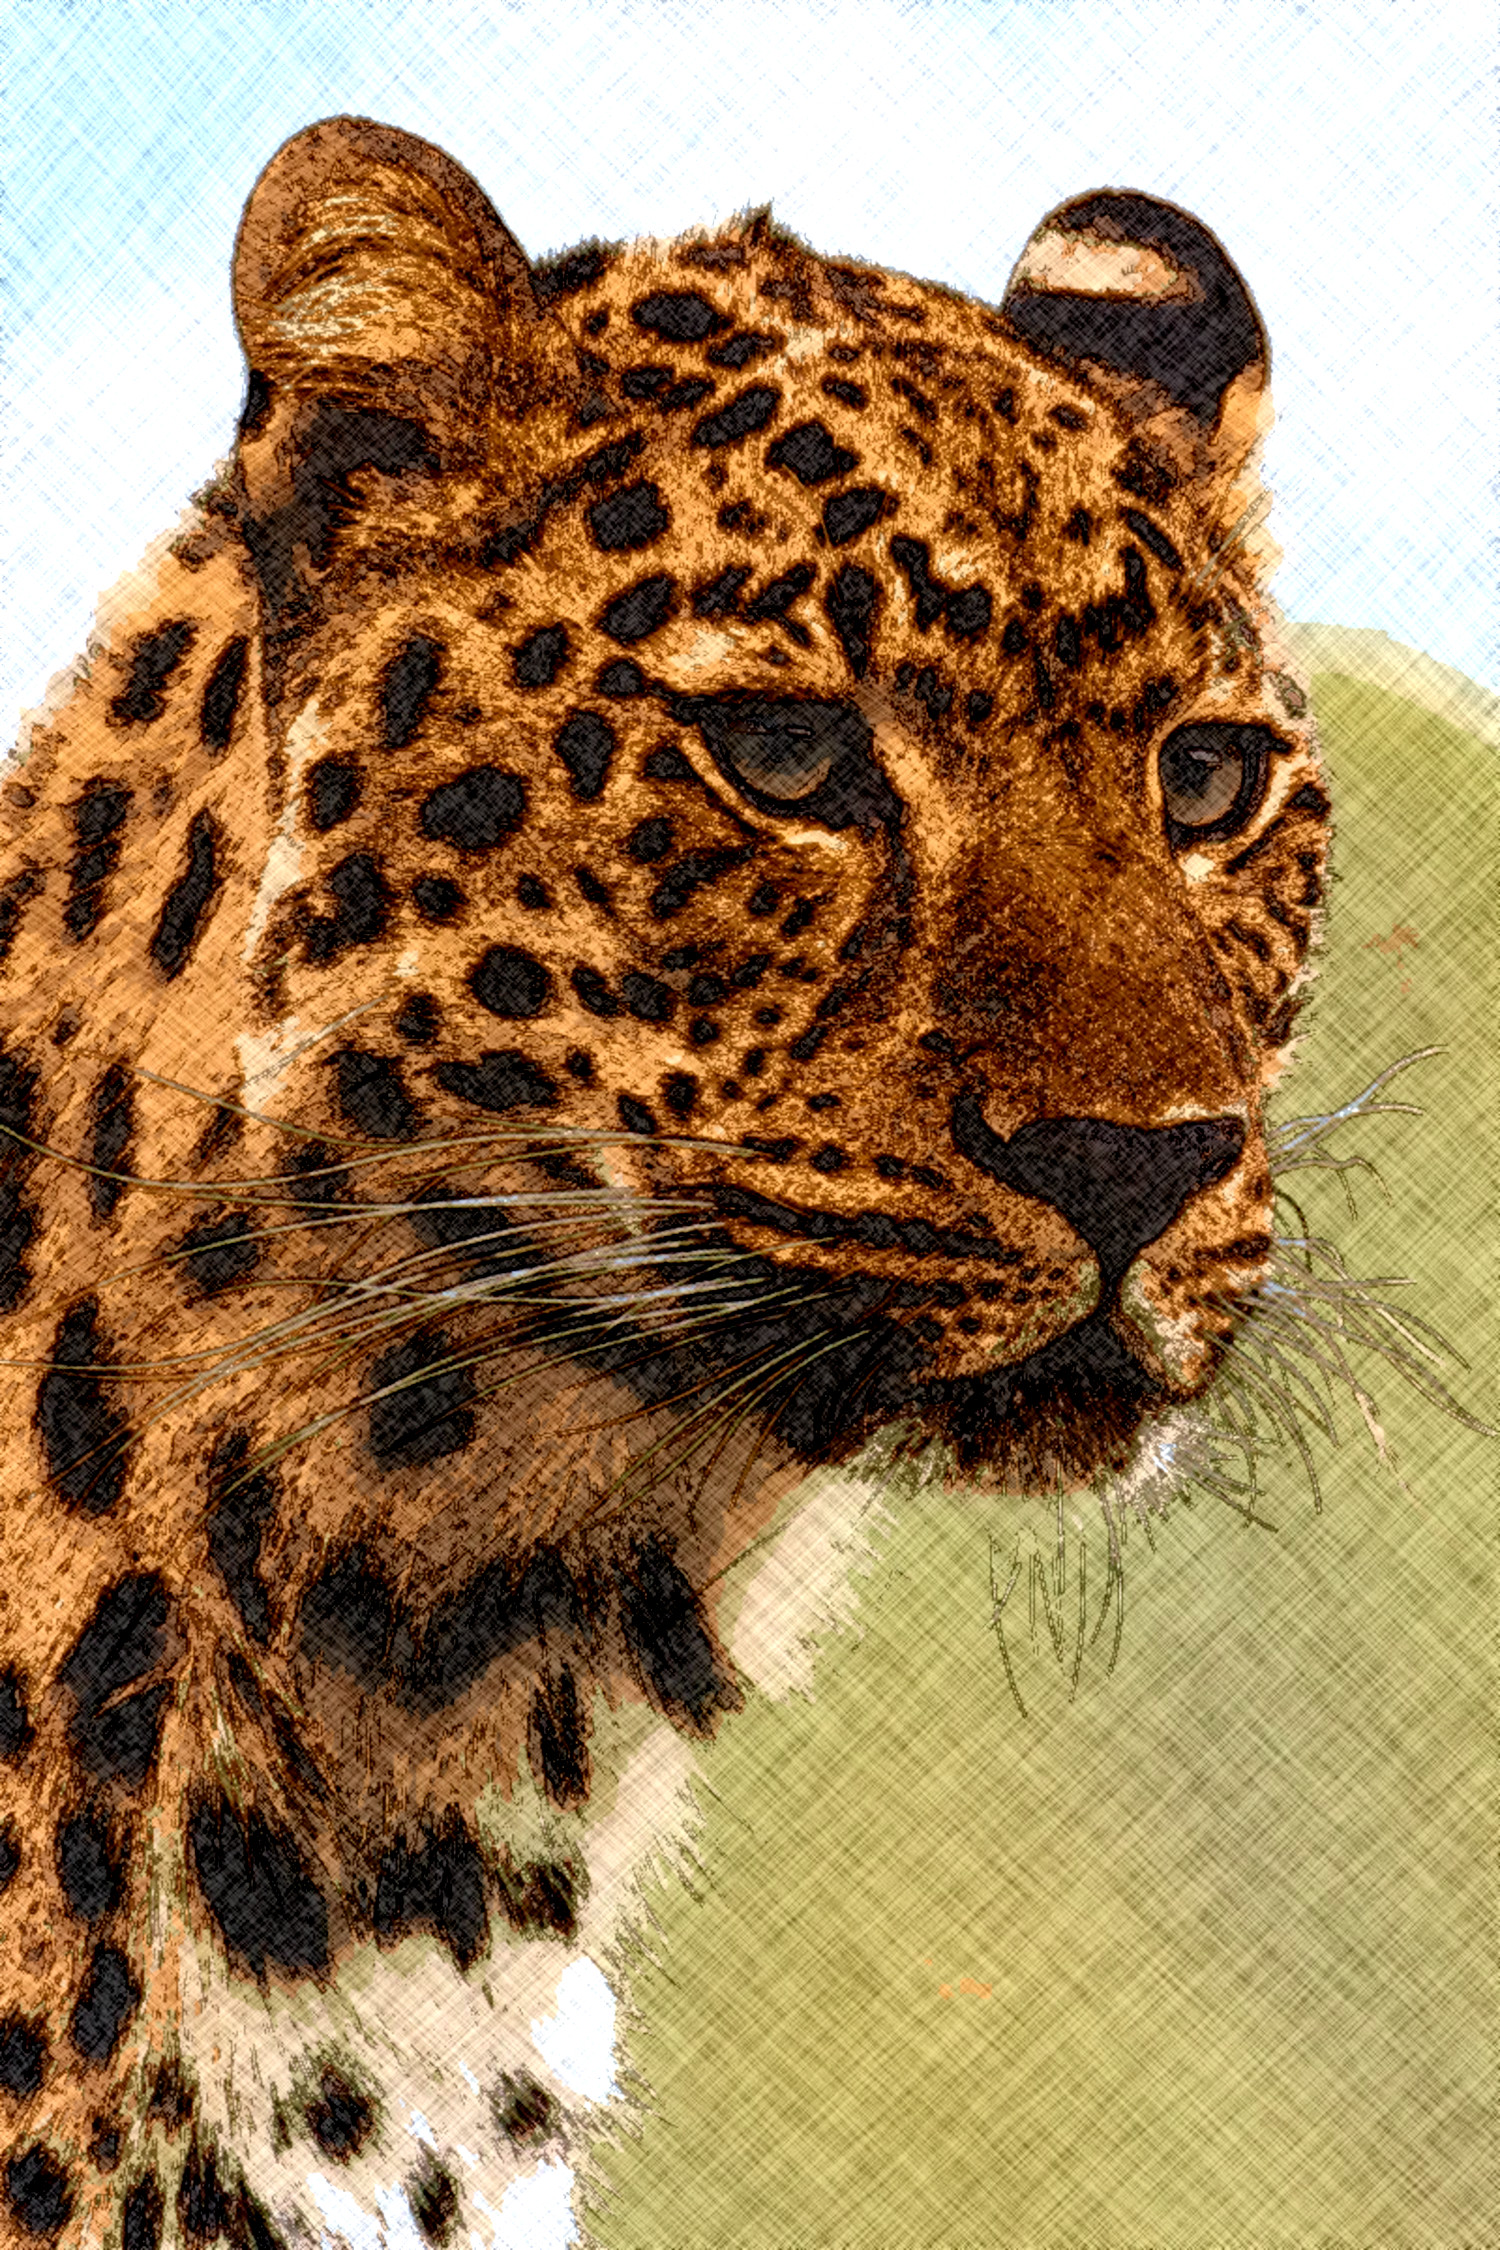 2021-11-29 16-34-20cheetah-leopard-animal-big-87403 with a sketch and paint look.jpeg